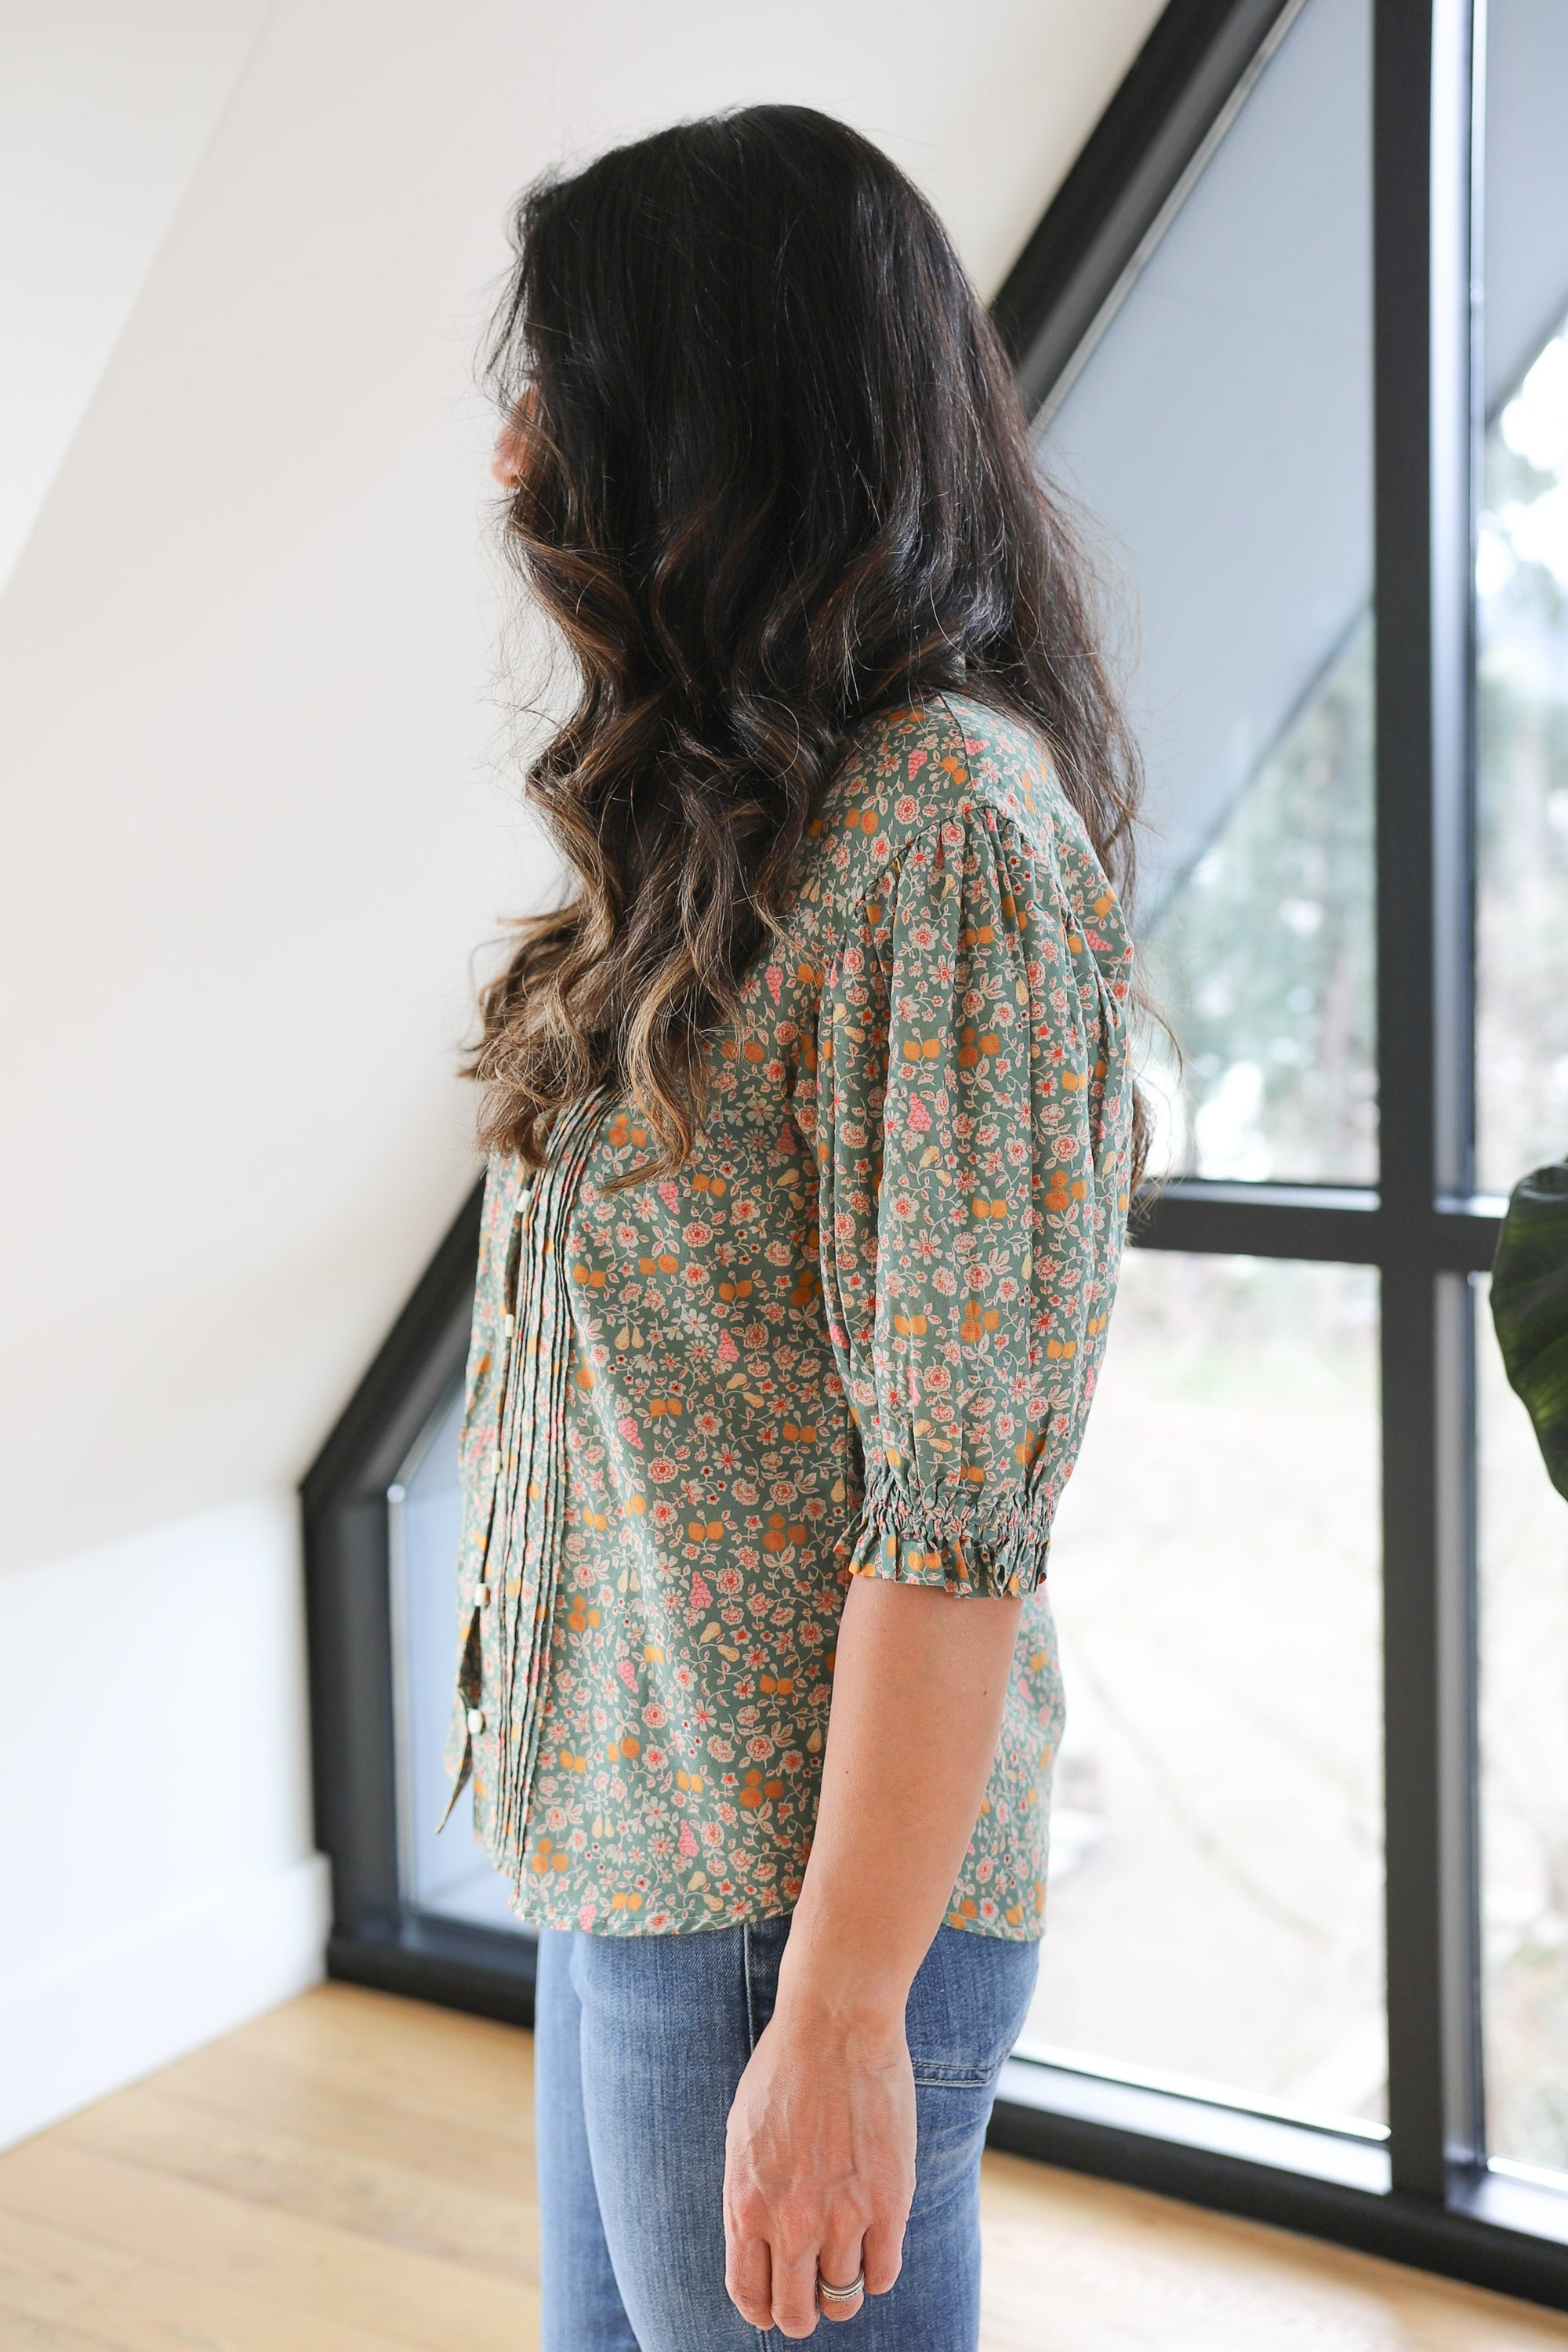 Birds of Paradis by Trovata Eliza Blouse in Petits Fruits